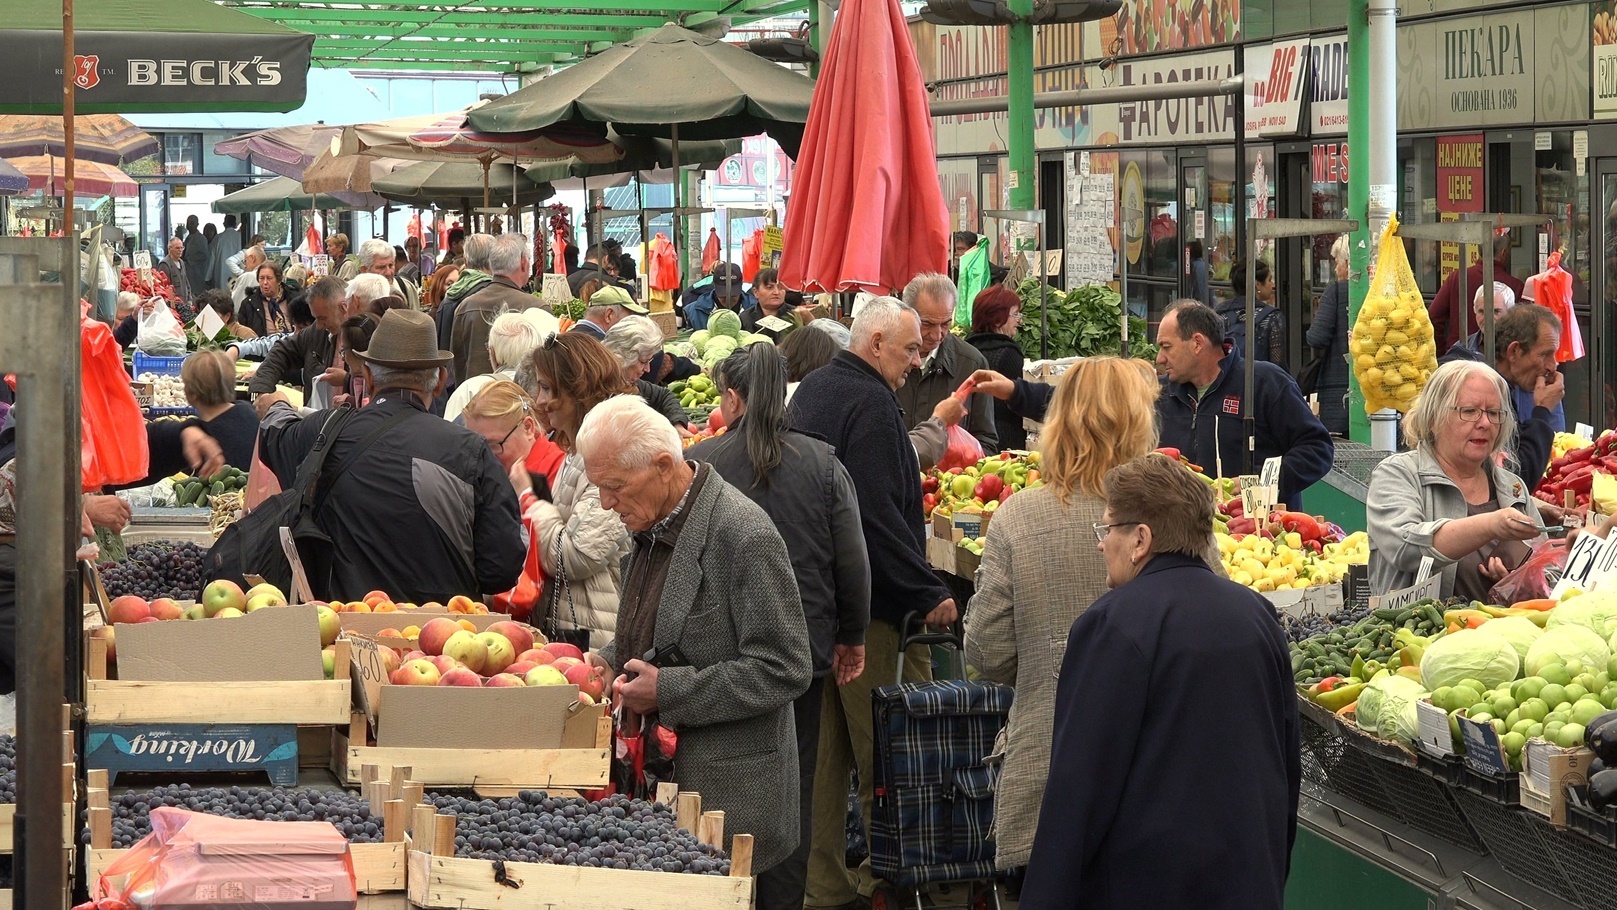 crowds-people-do-grocery-shopping-footage-085452700_prevstill